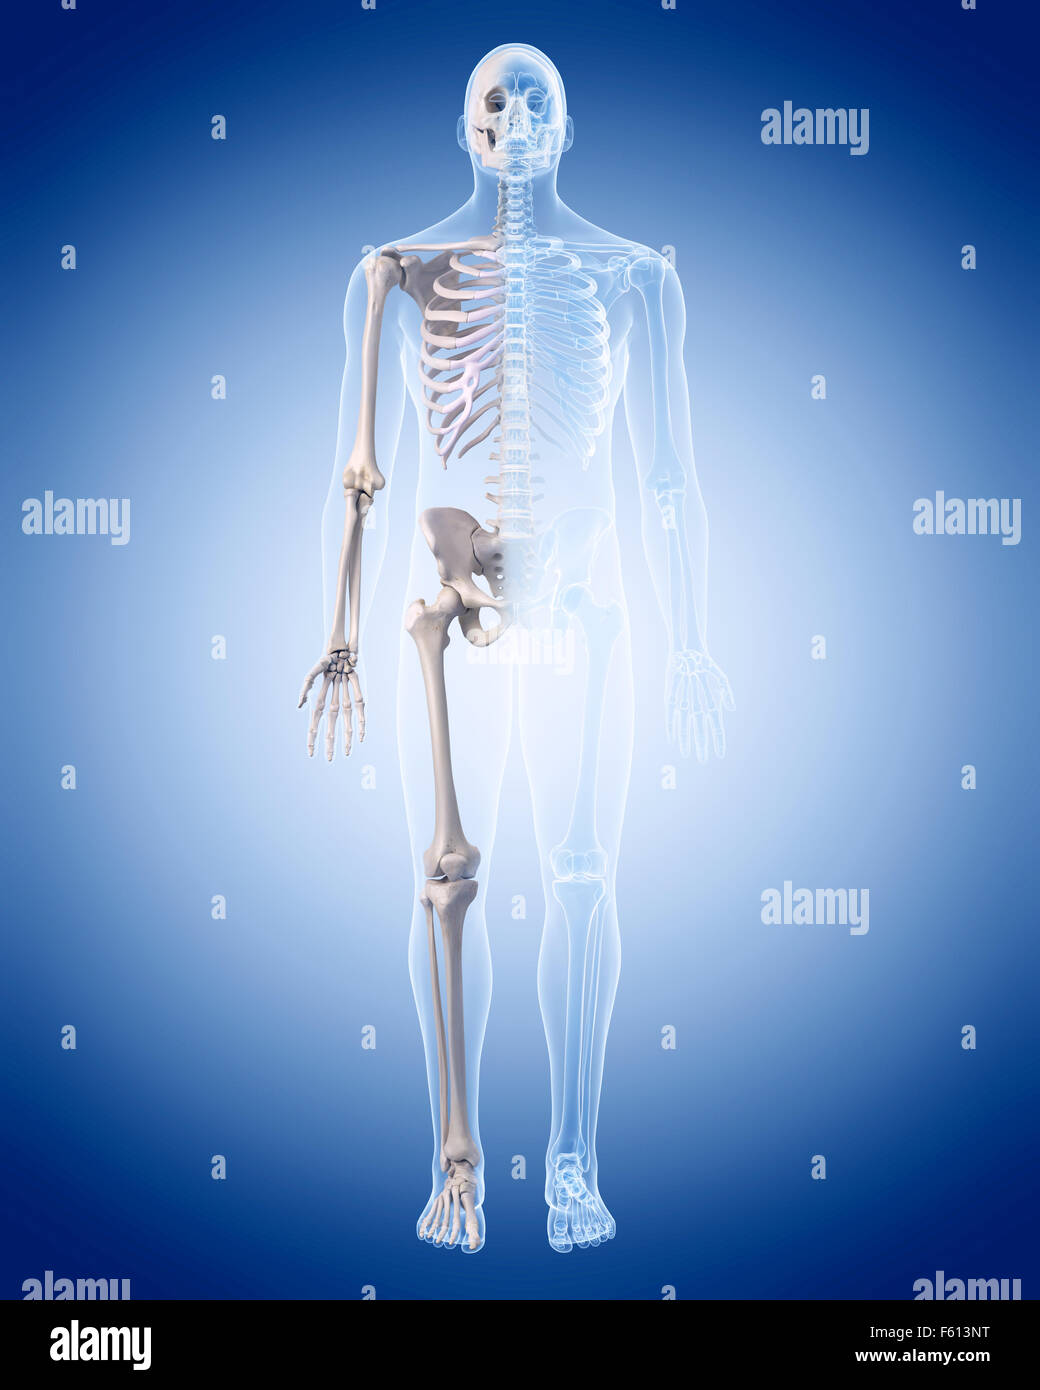 medically accurate illustration of the human skeleton Stock Photo - Alamy